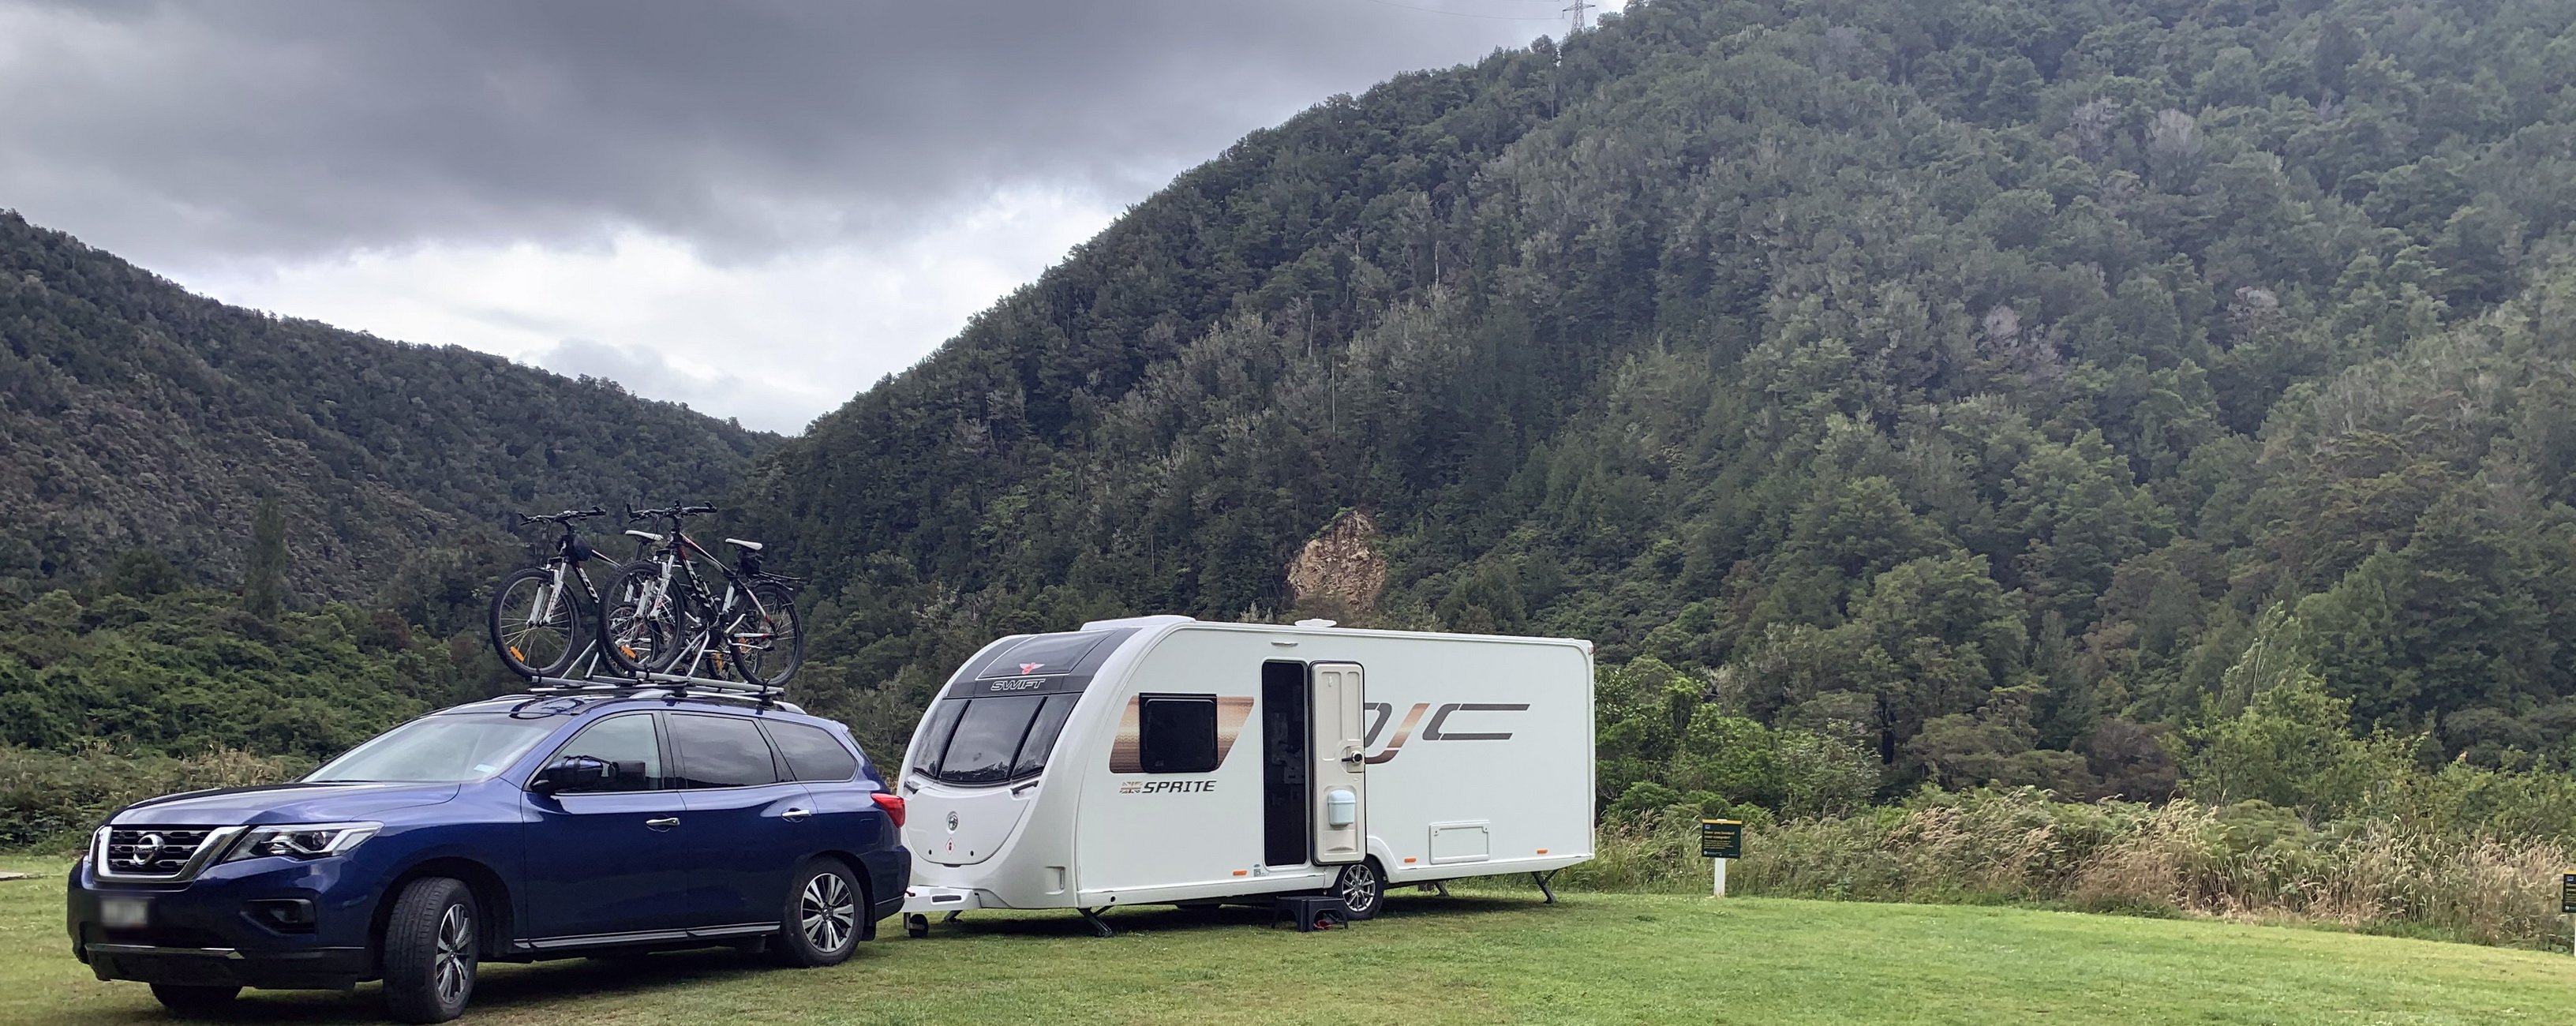 Lyell Camping Ground - Buller Gorge